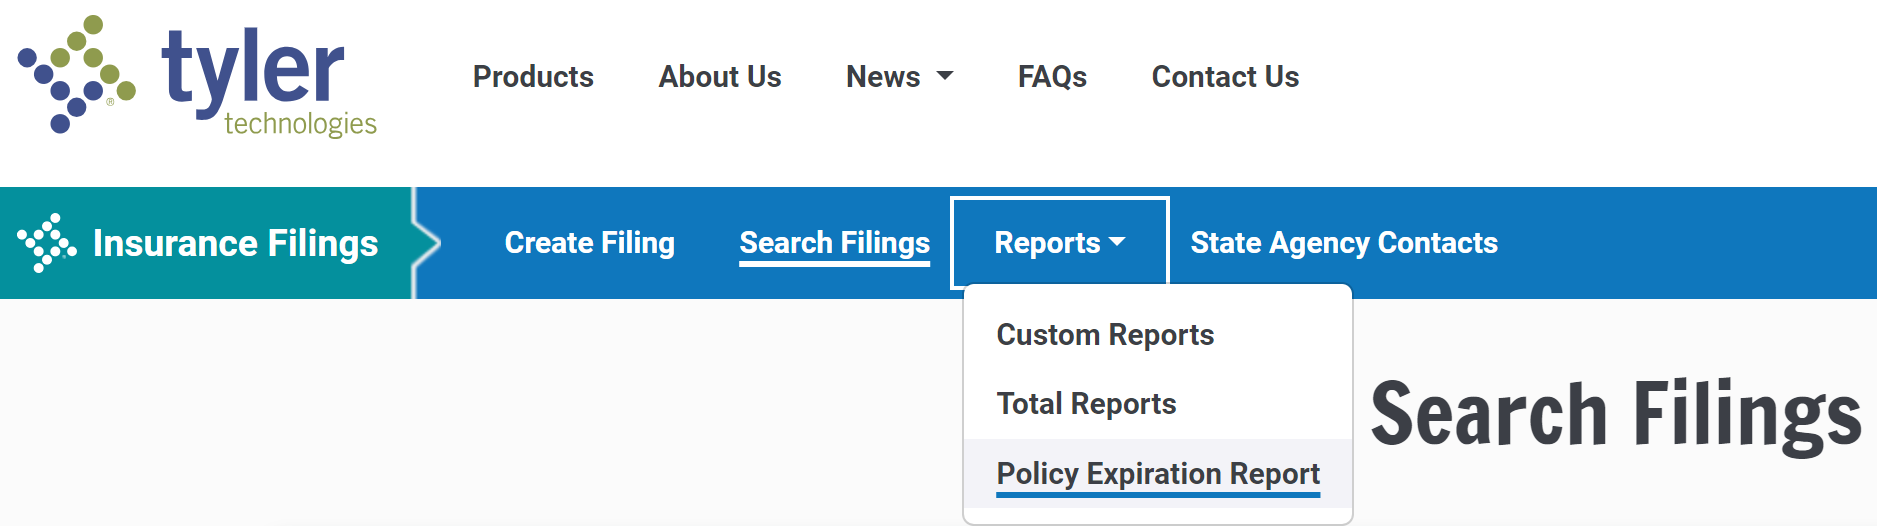 Once logged in, the Policy Expiration Report can be selected form the 'Reports' menu.